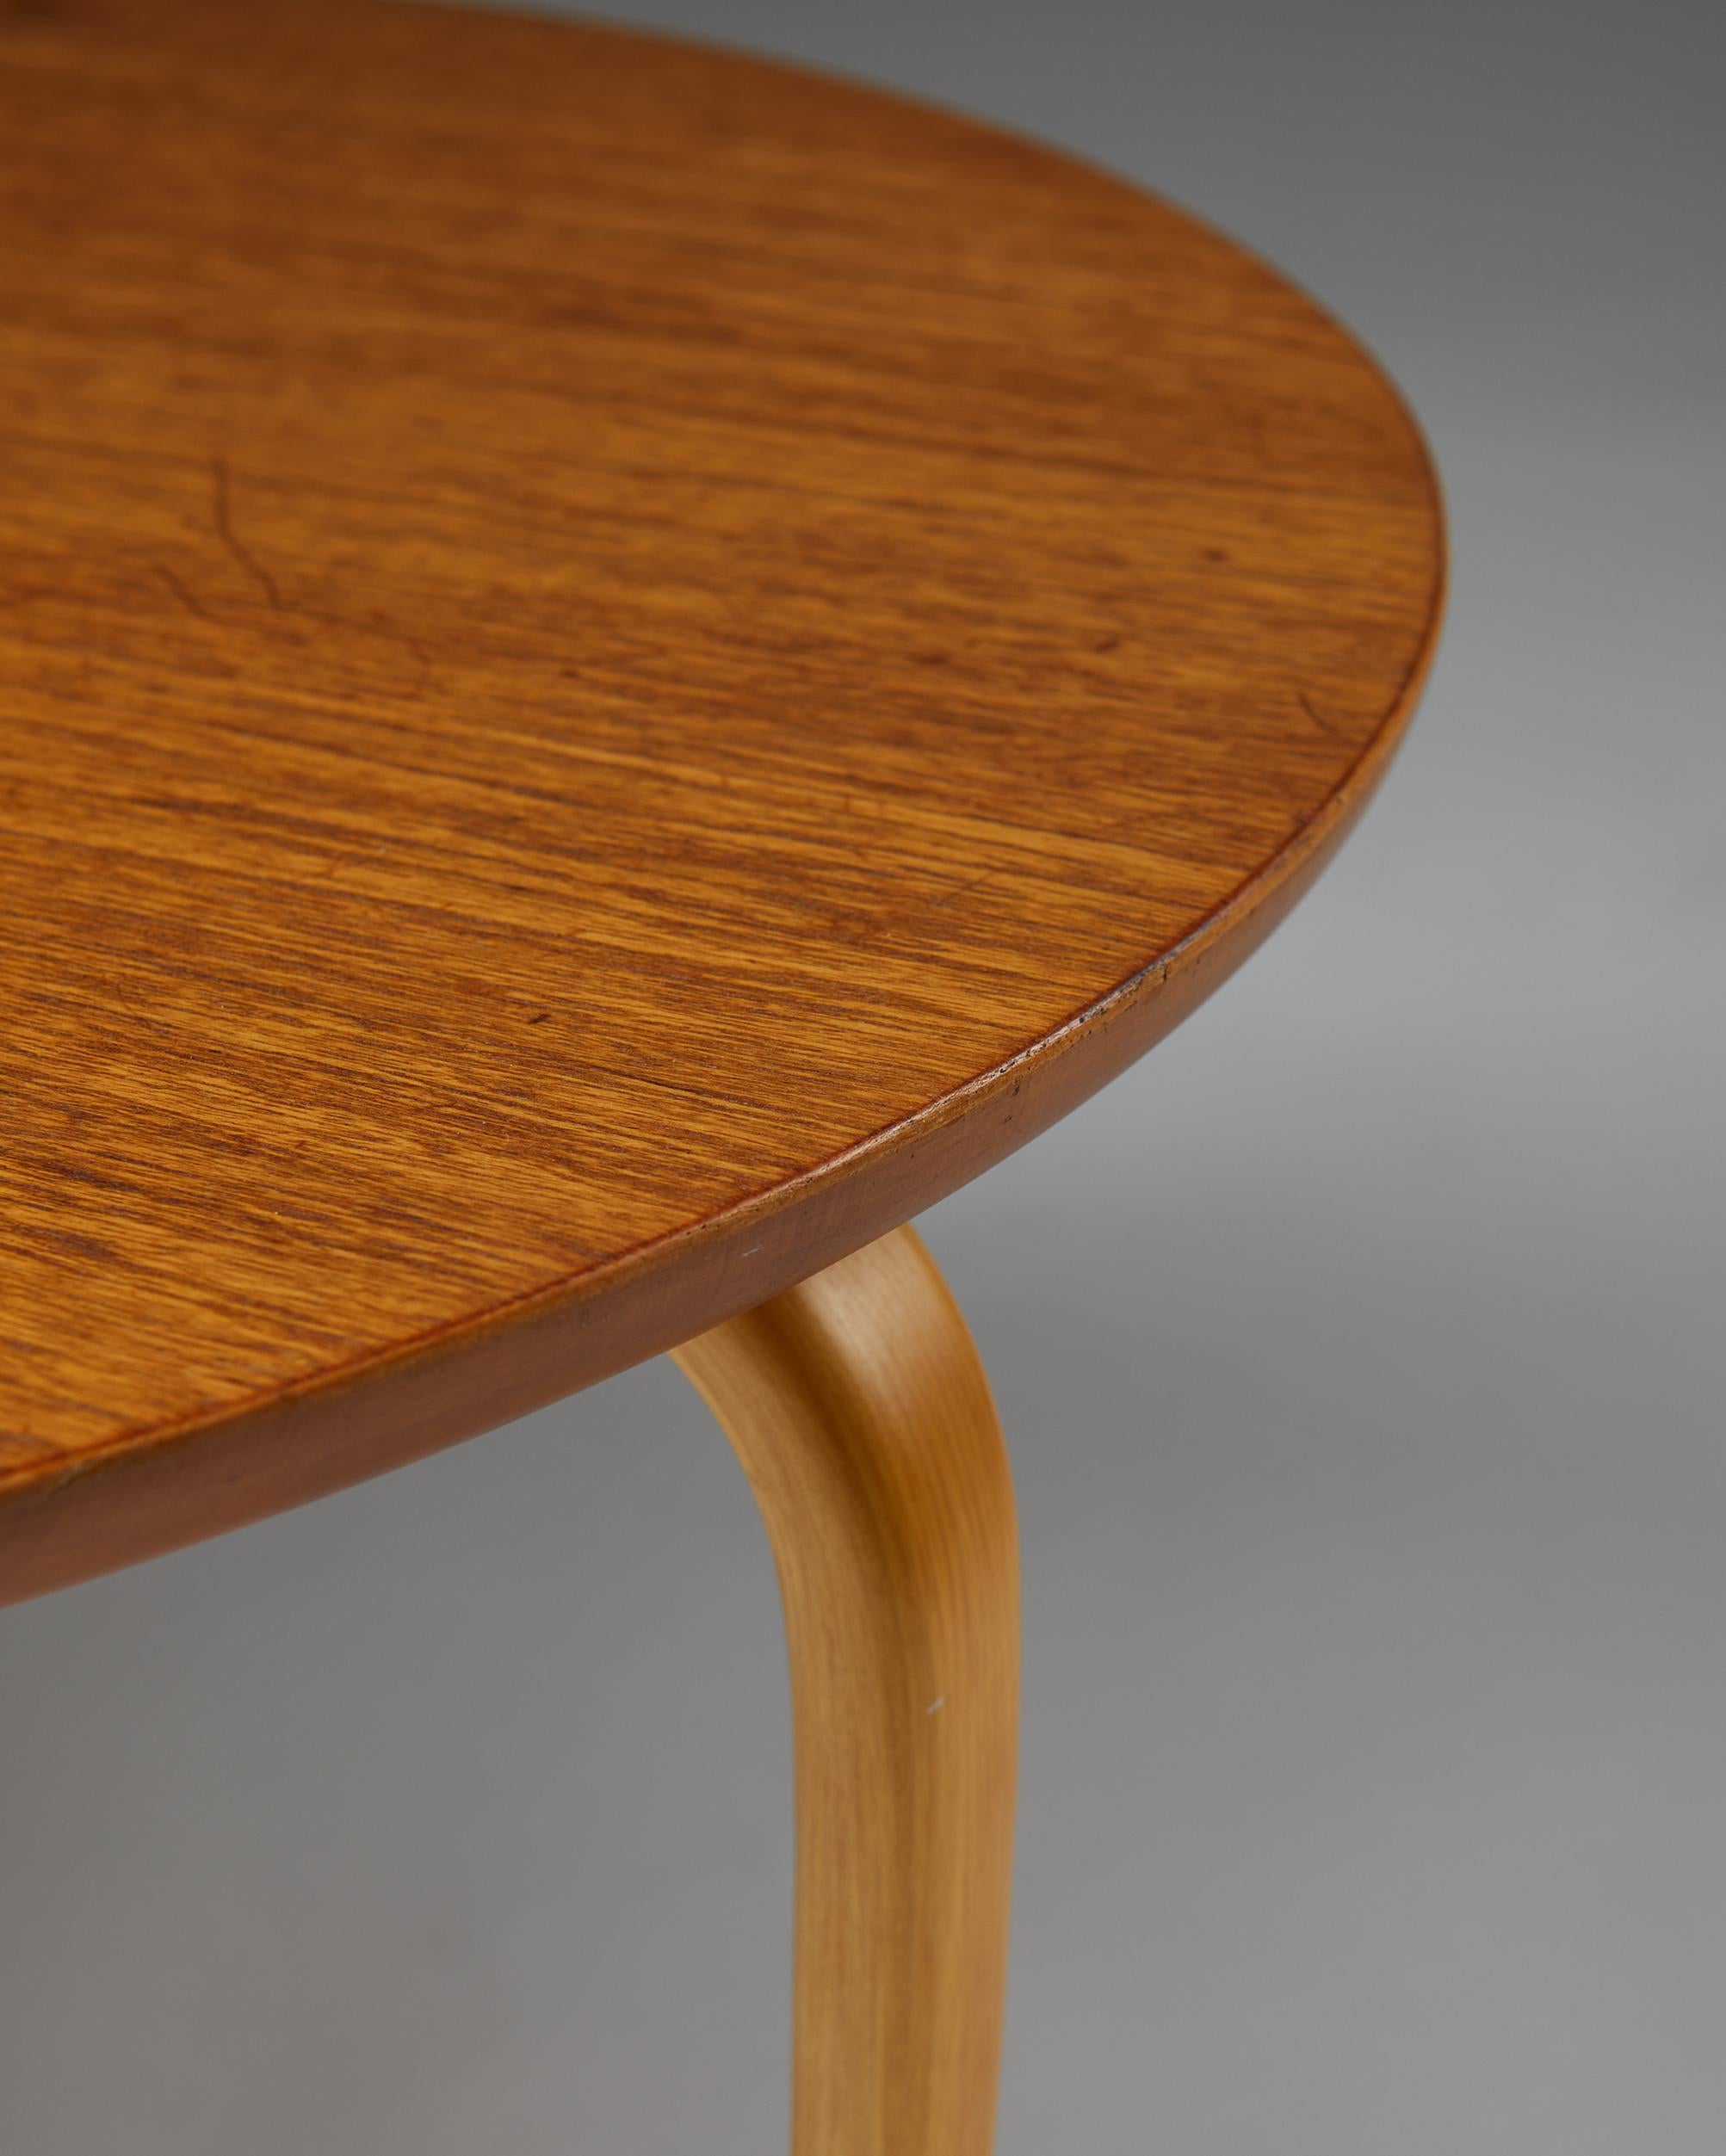 20th Century Occasional Table “Annika” Designed by Bruno Mathsson for Karl Mathsson, Sweden 